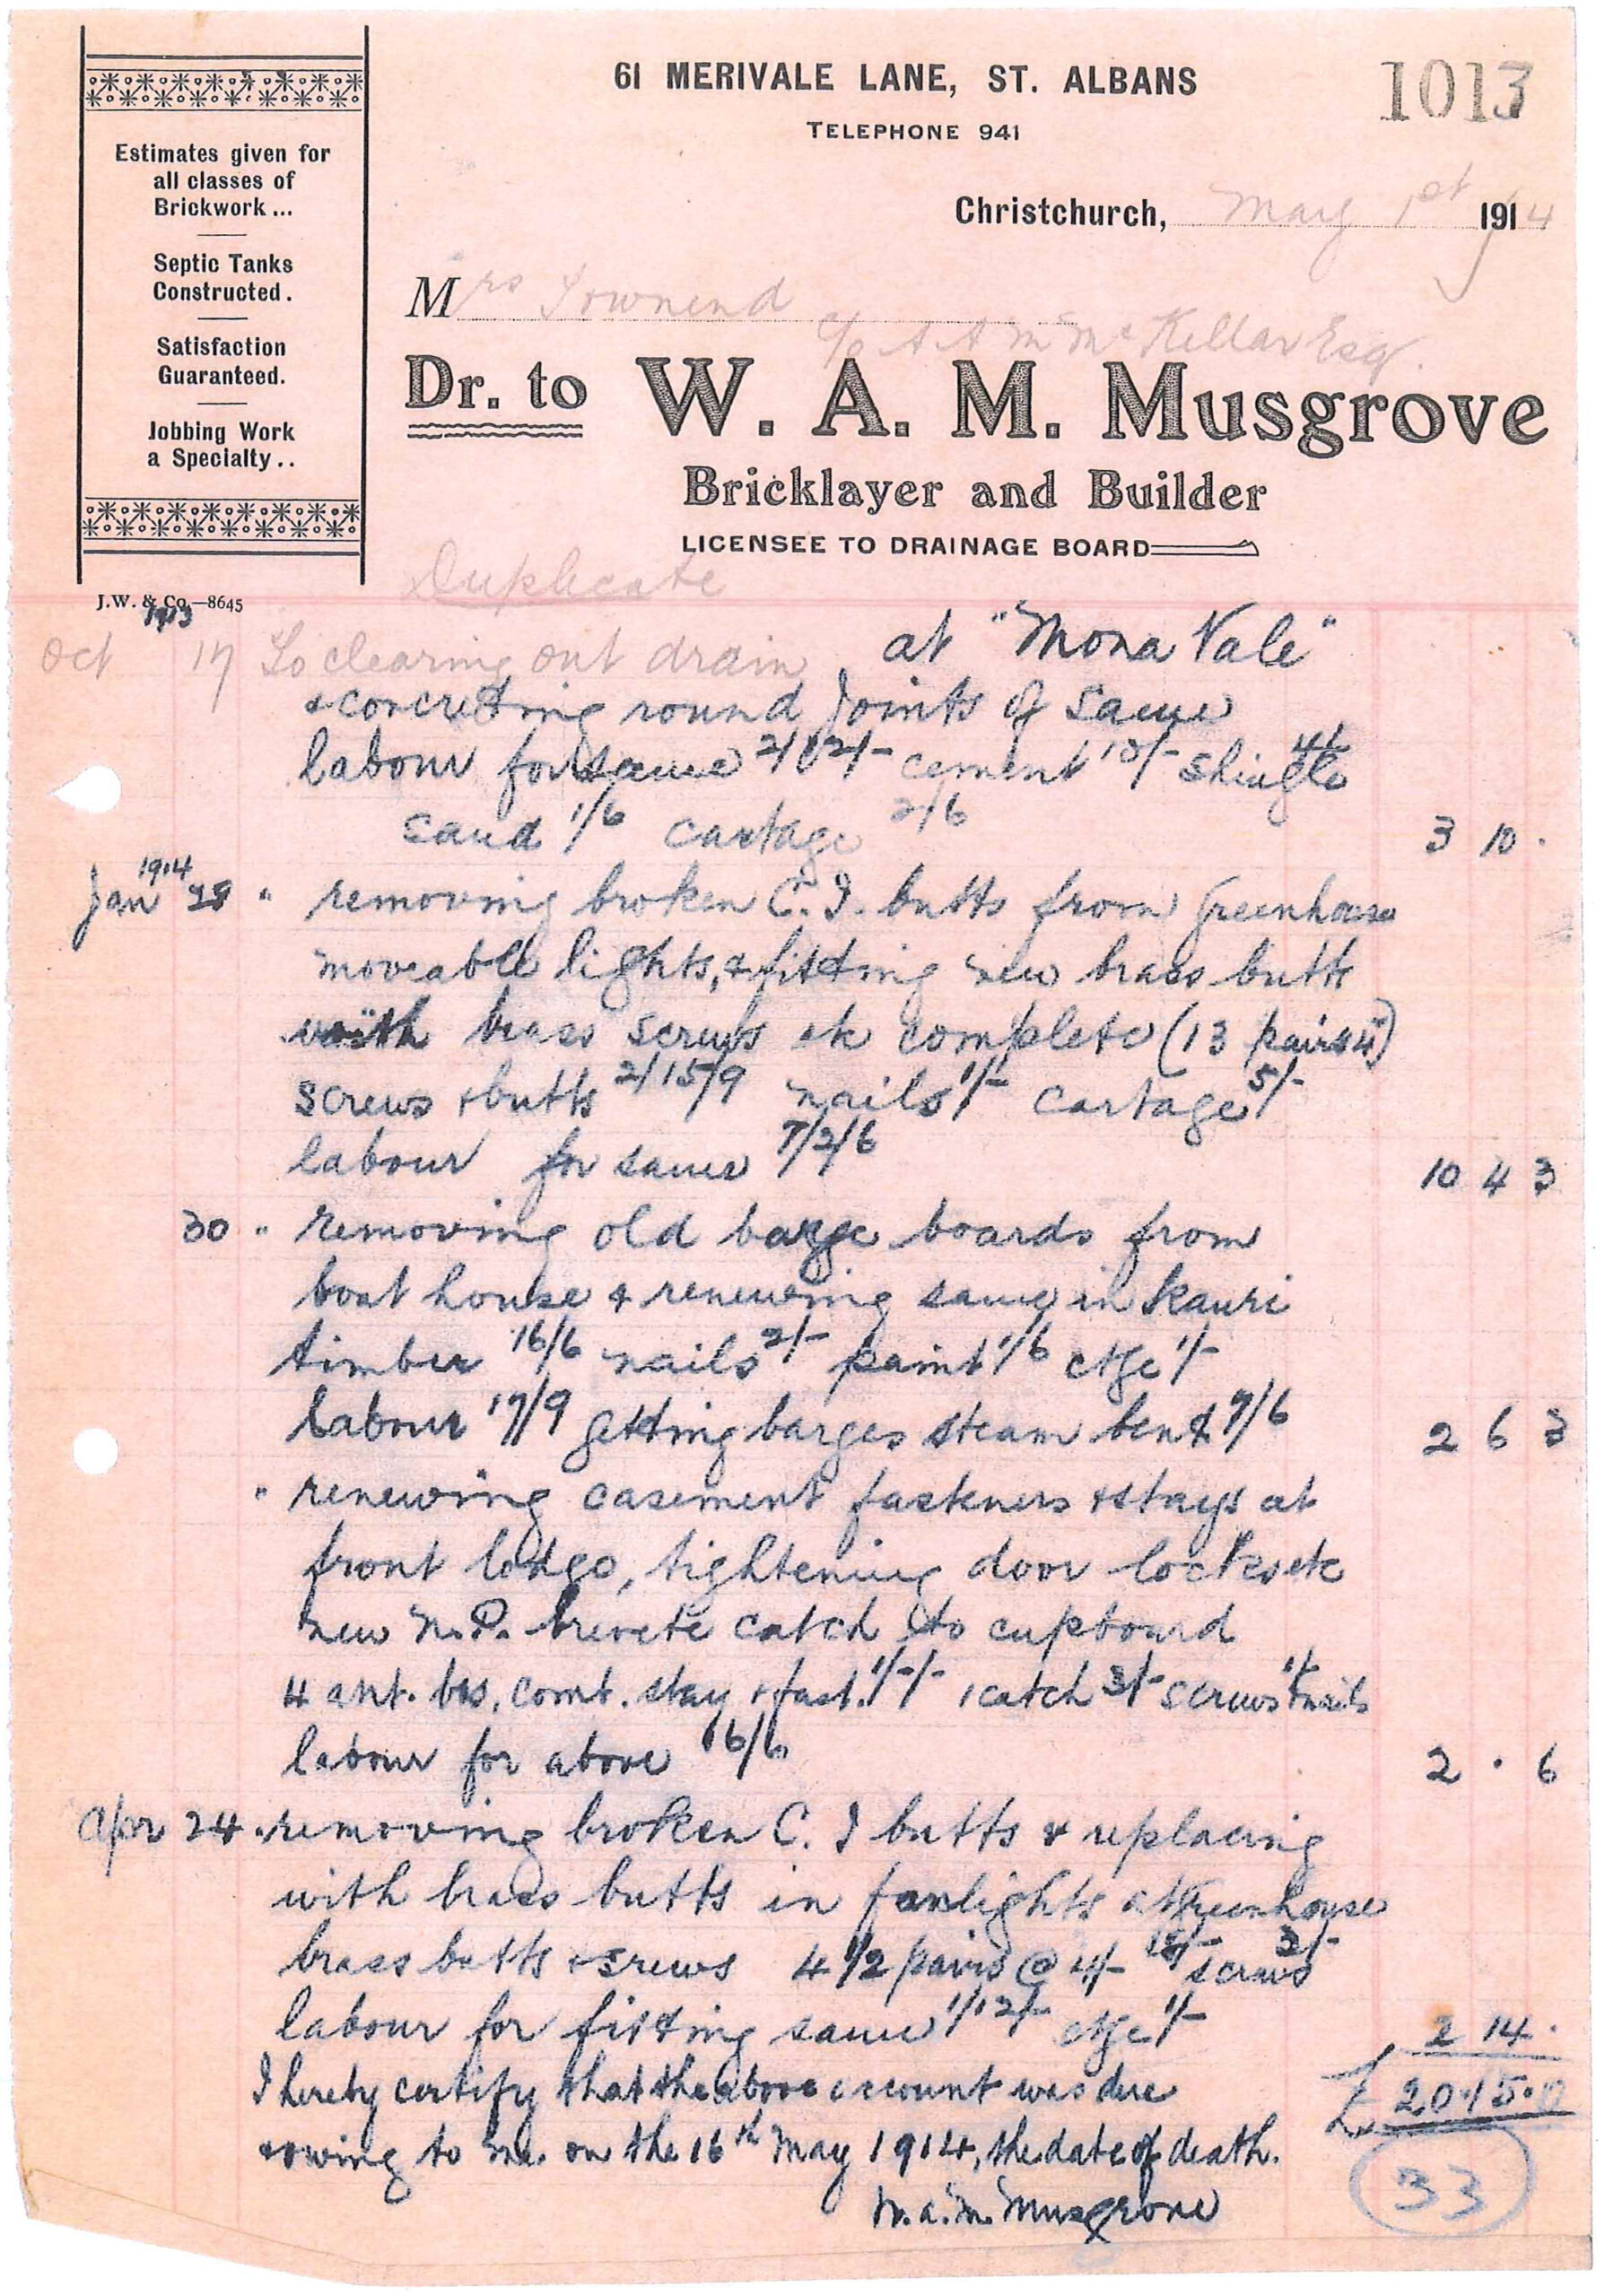 Invoice to Mrs Townend from W.A.M. Musgrove, Bricklayer and Builder